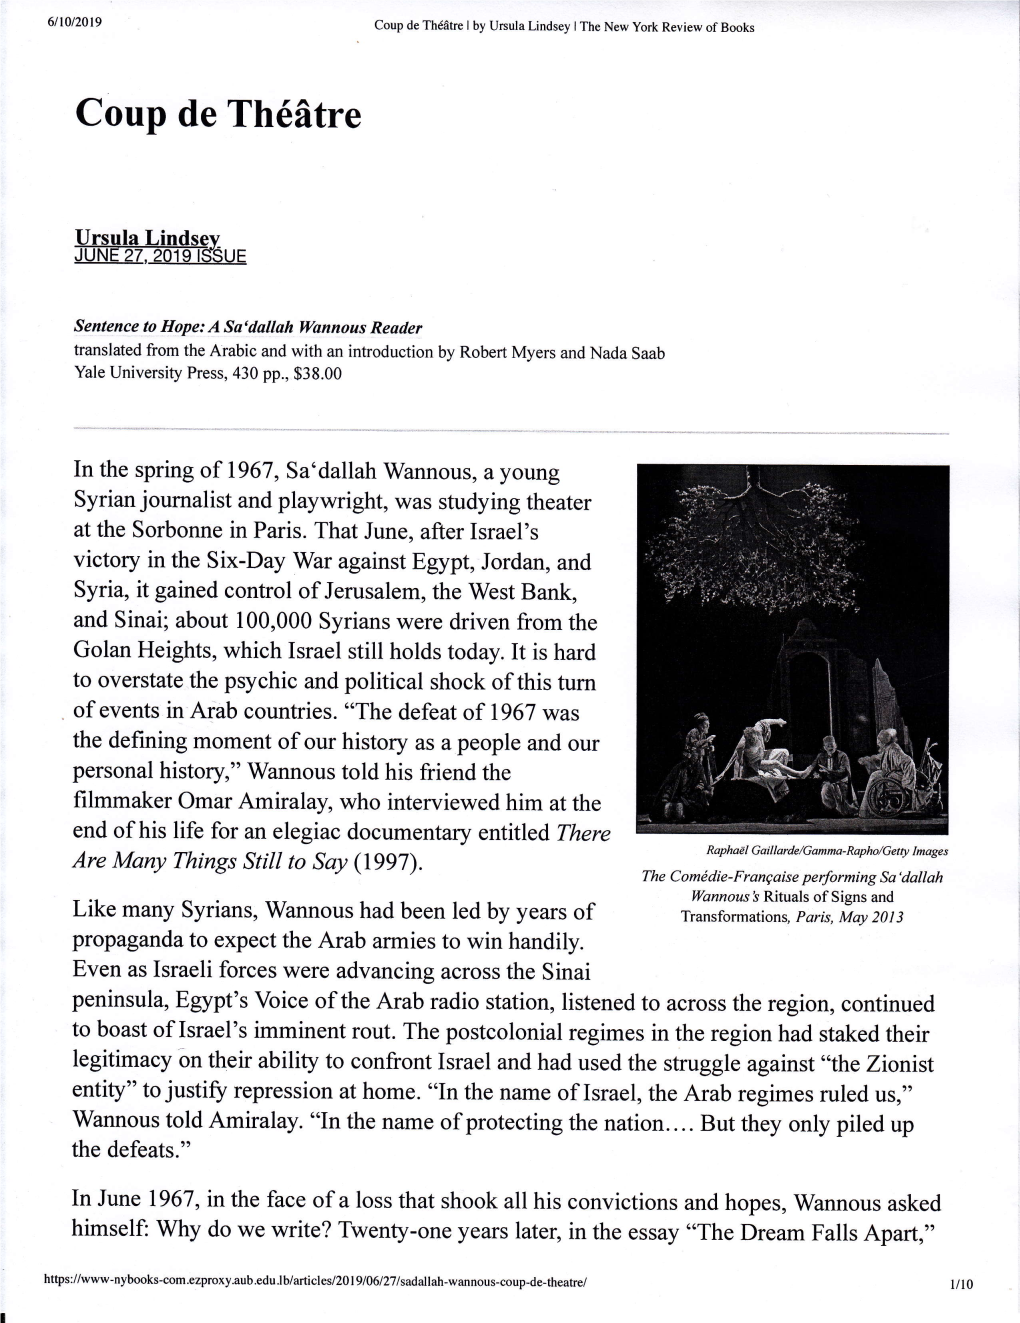 Review in the New York Review of Books